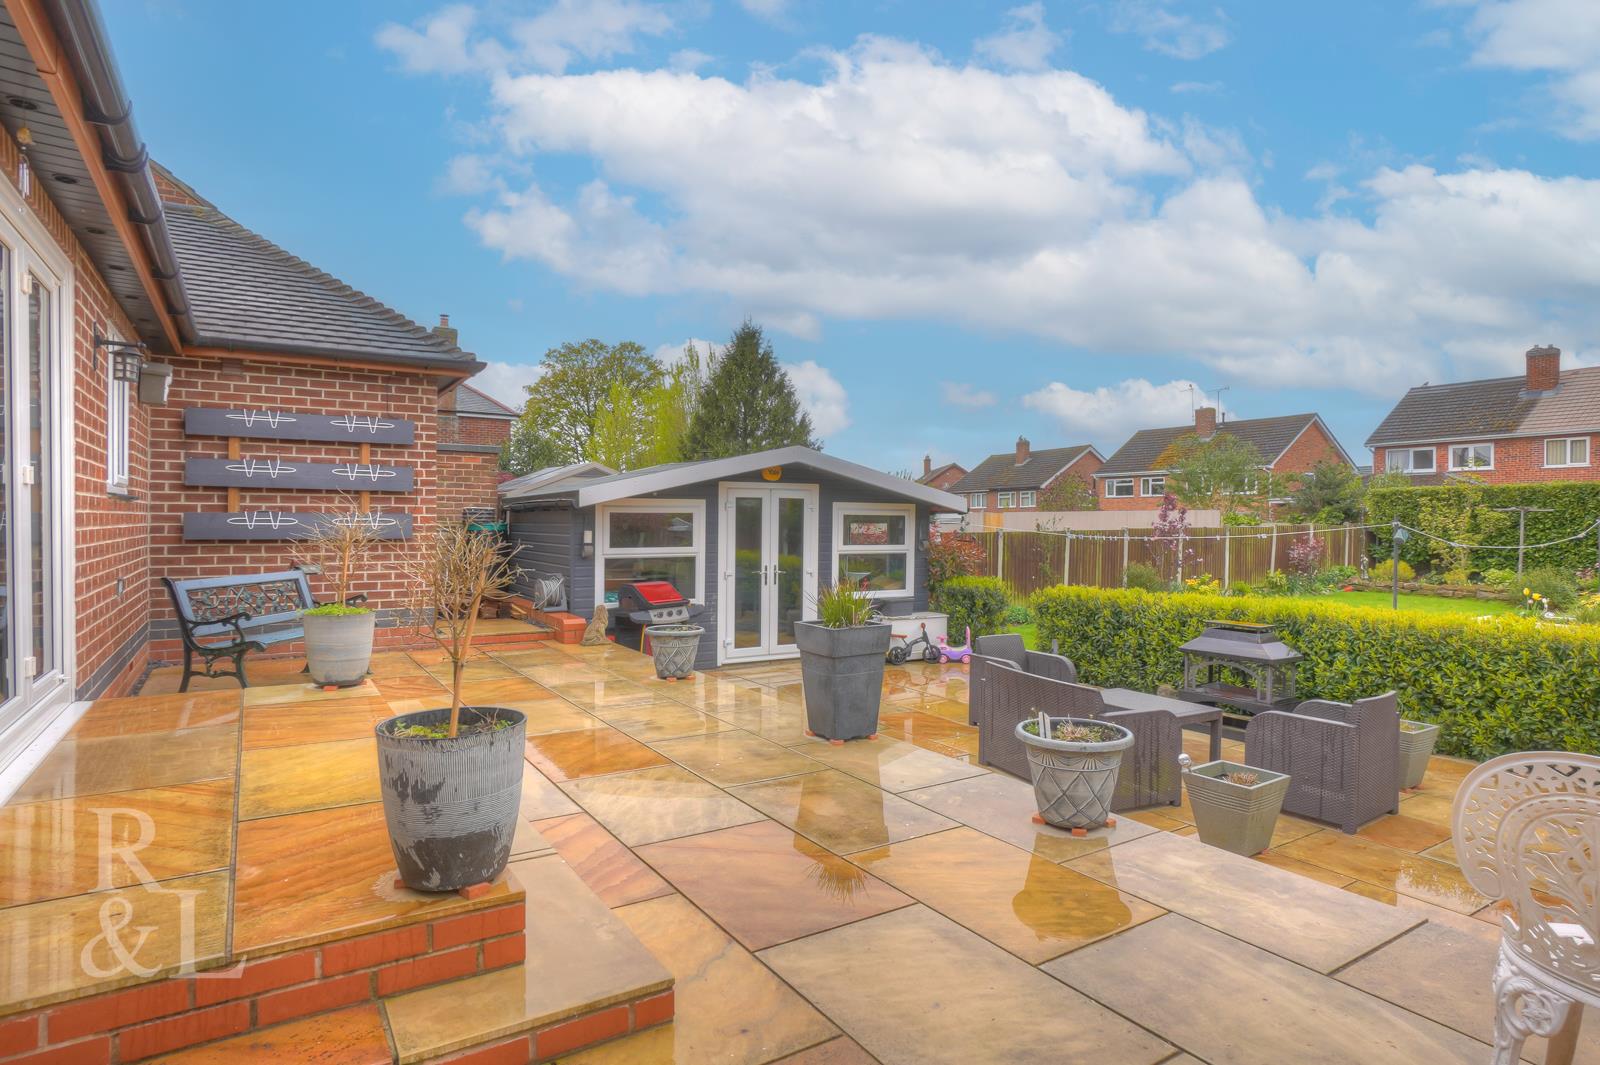 Property image for Westfield Road, Swadlincote